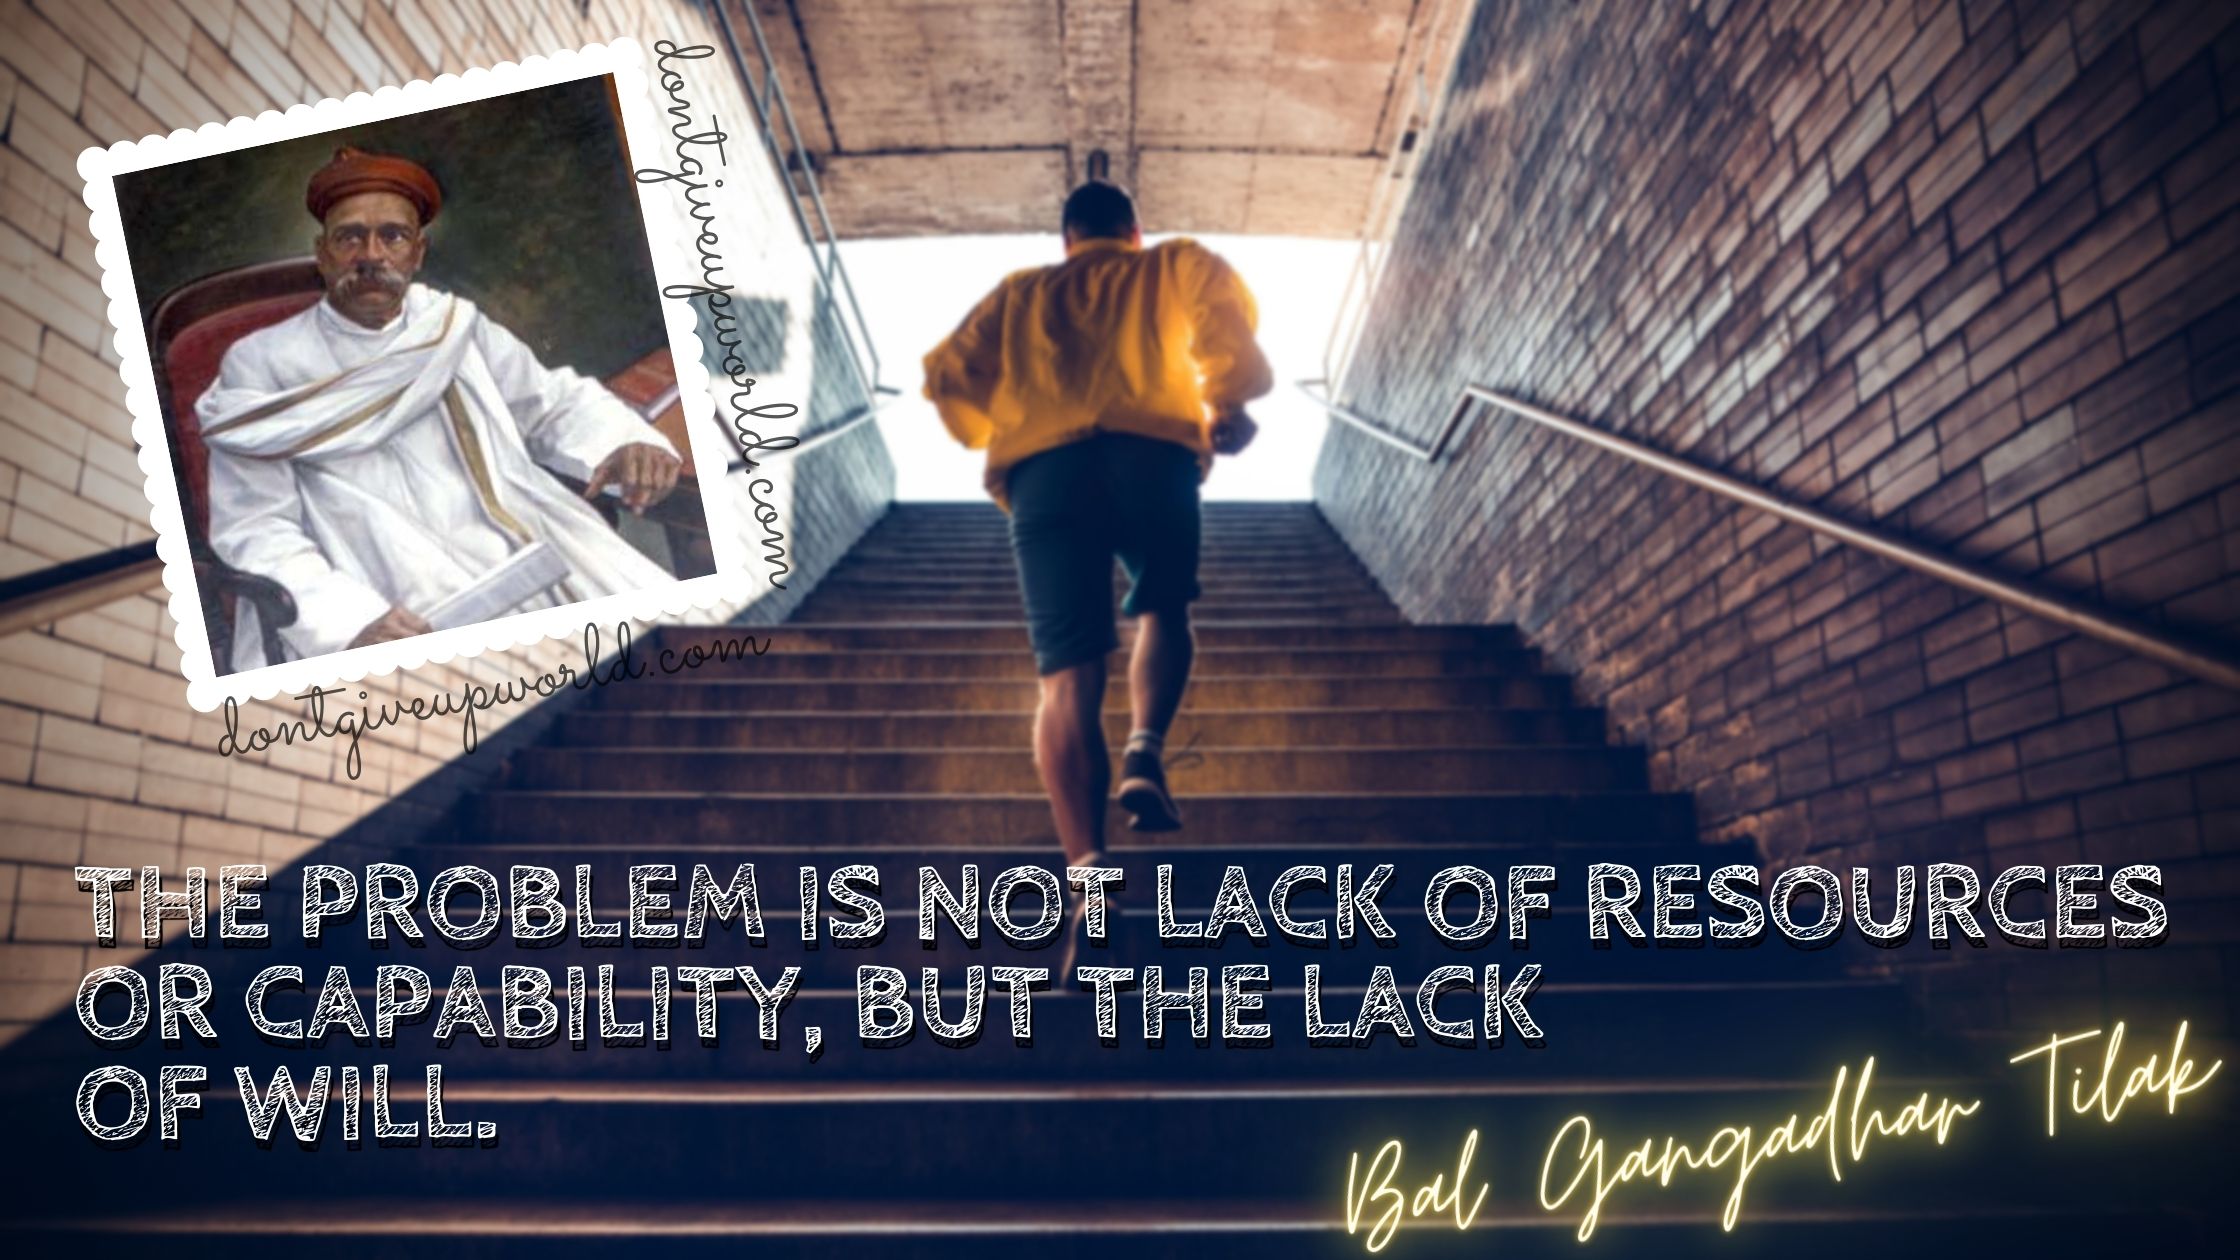 bal gangadhar wallpaper with quotes on lack of will power
The problem is not lack of resources or capability, but the lack of will.
bal gangadhar tilak 100th death anniversary
man working out on stairs